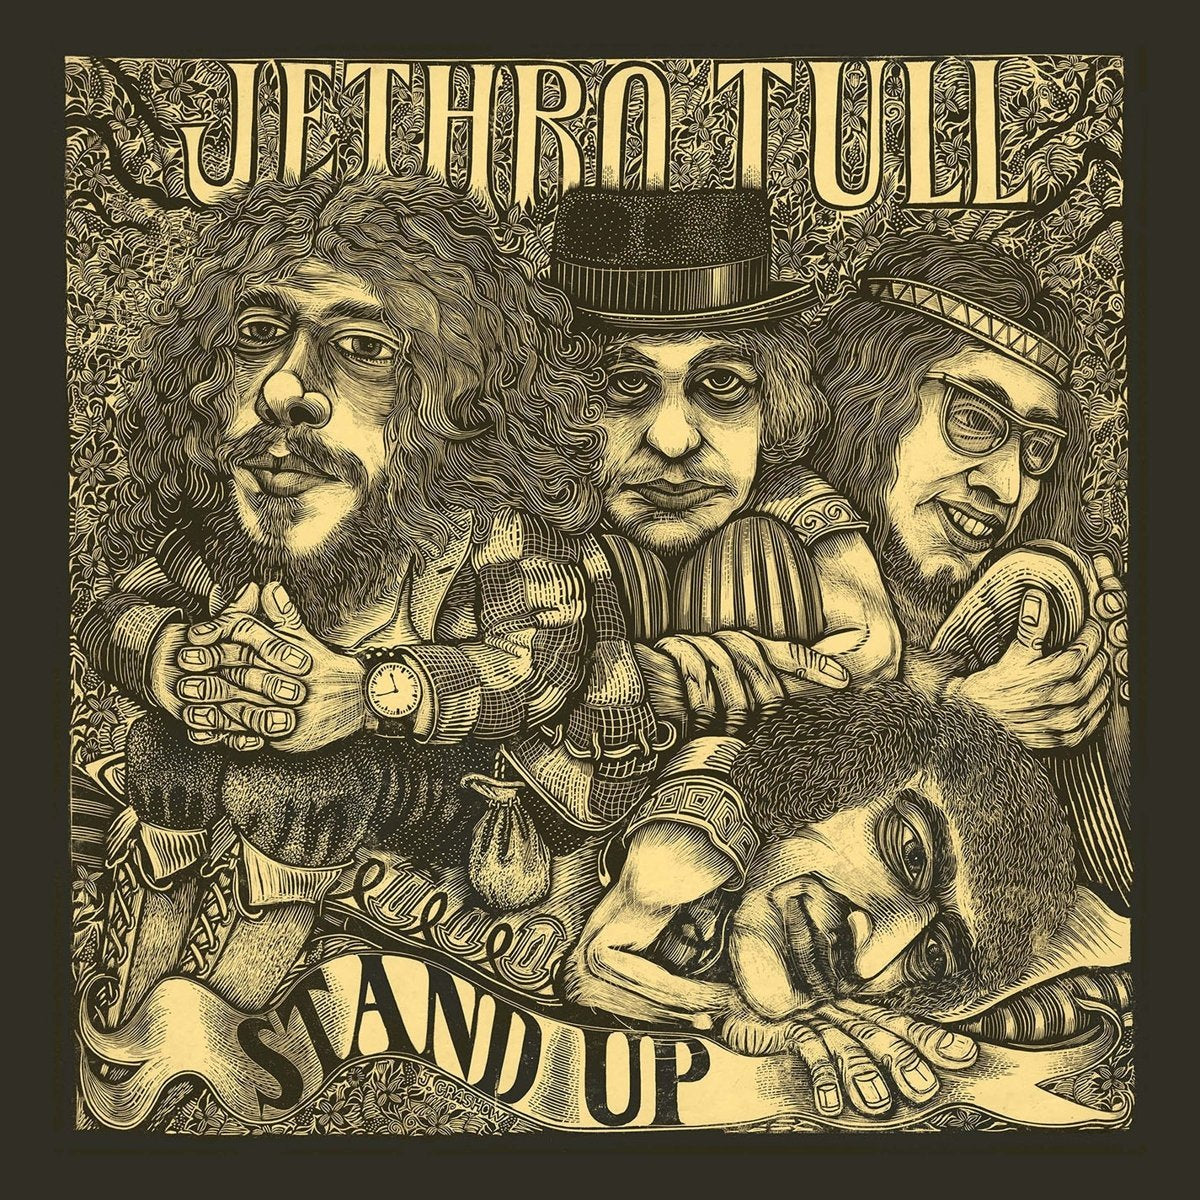 Jethro Tull - Stand Up [2-lp, 45 RPM]